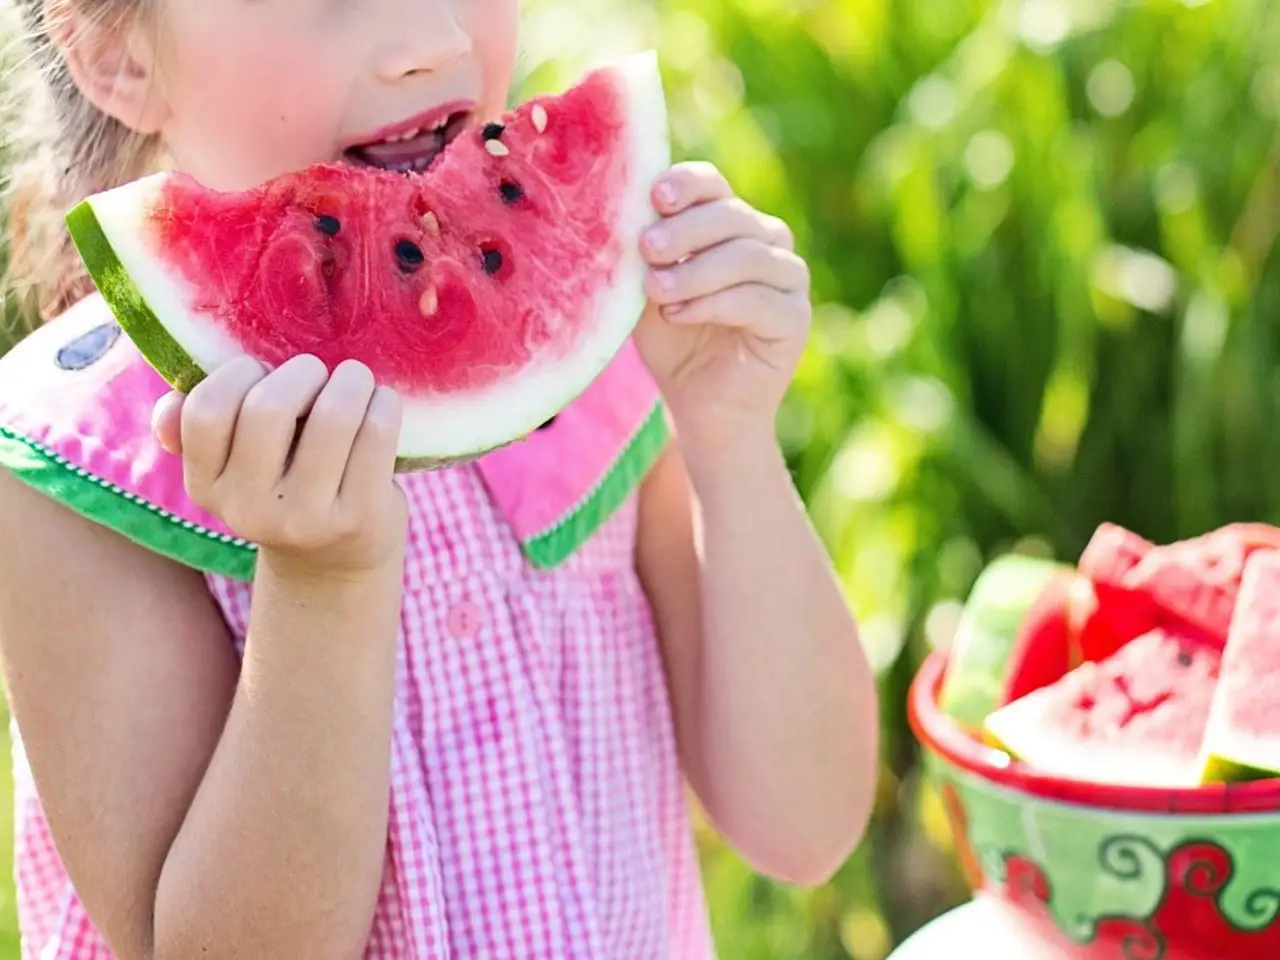 Child relishing a piece of watermelon